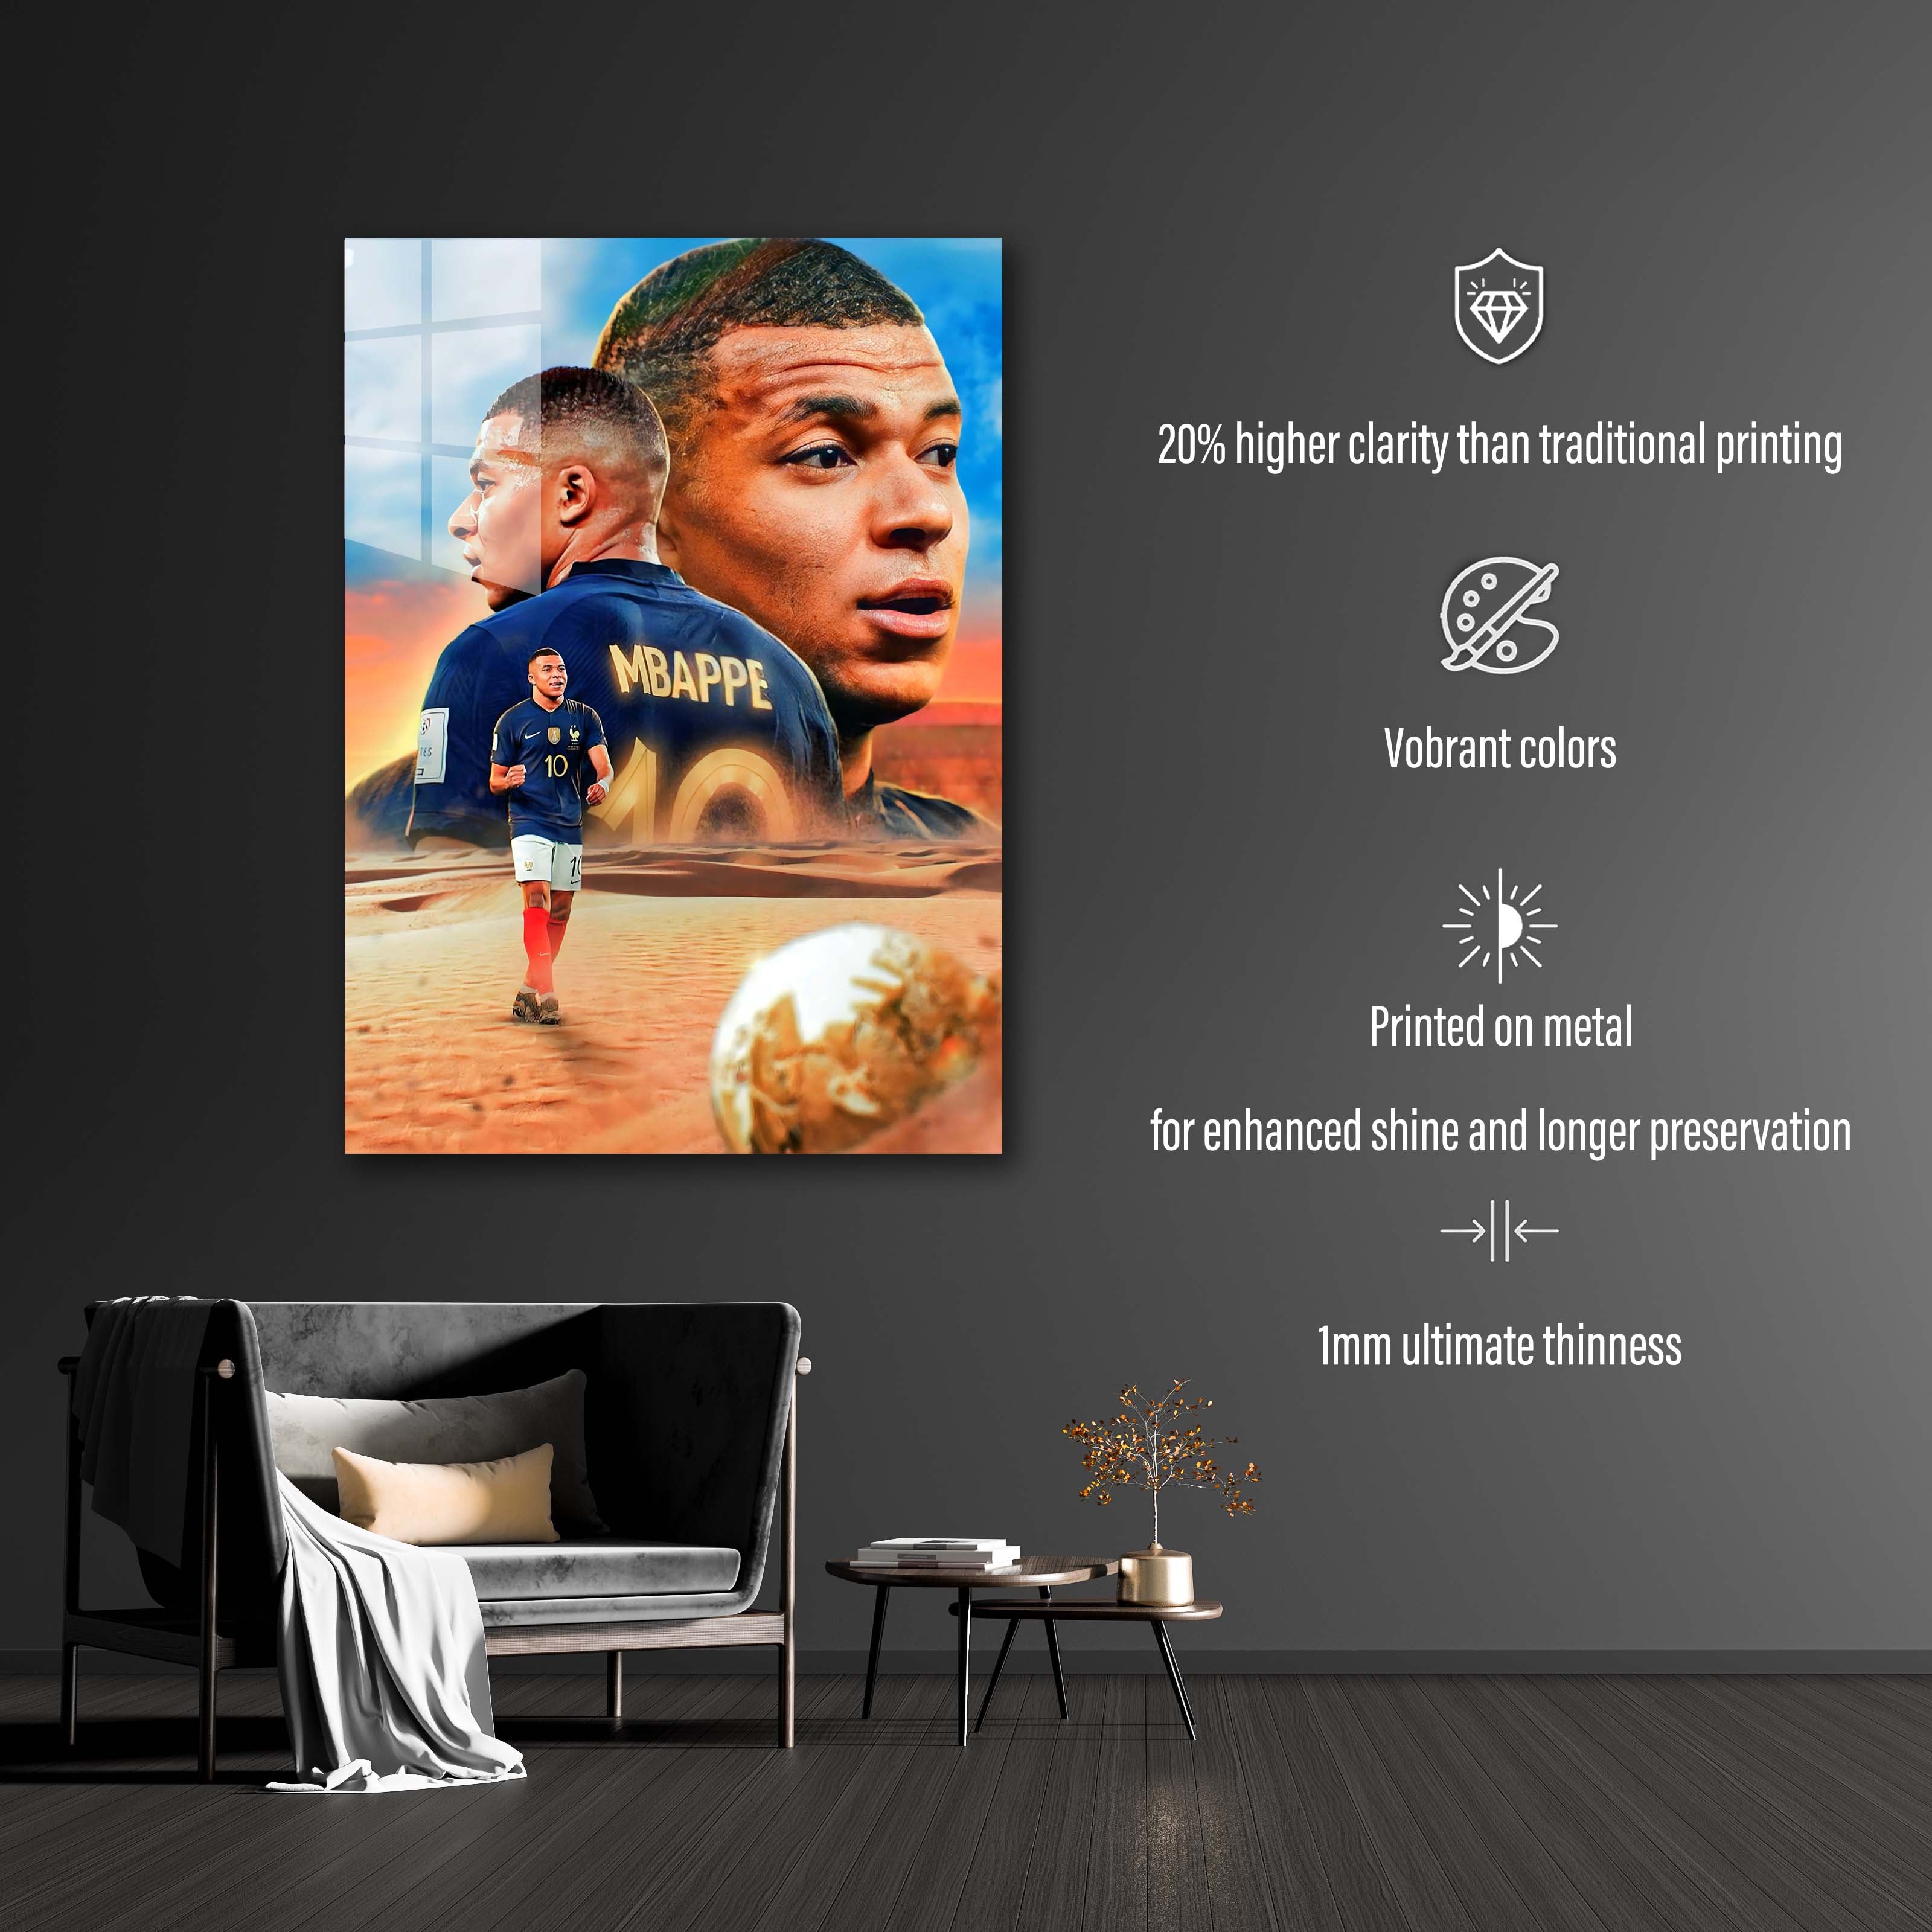 Mbappe 10-designed by @My Kido Art